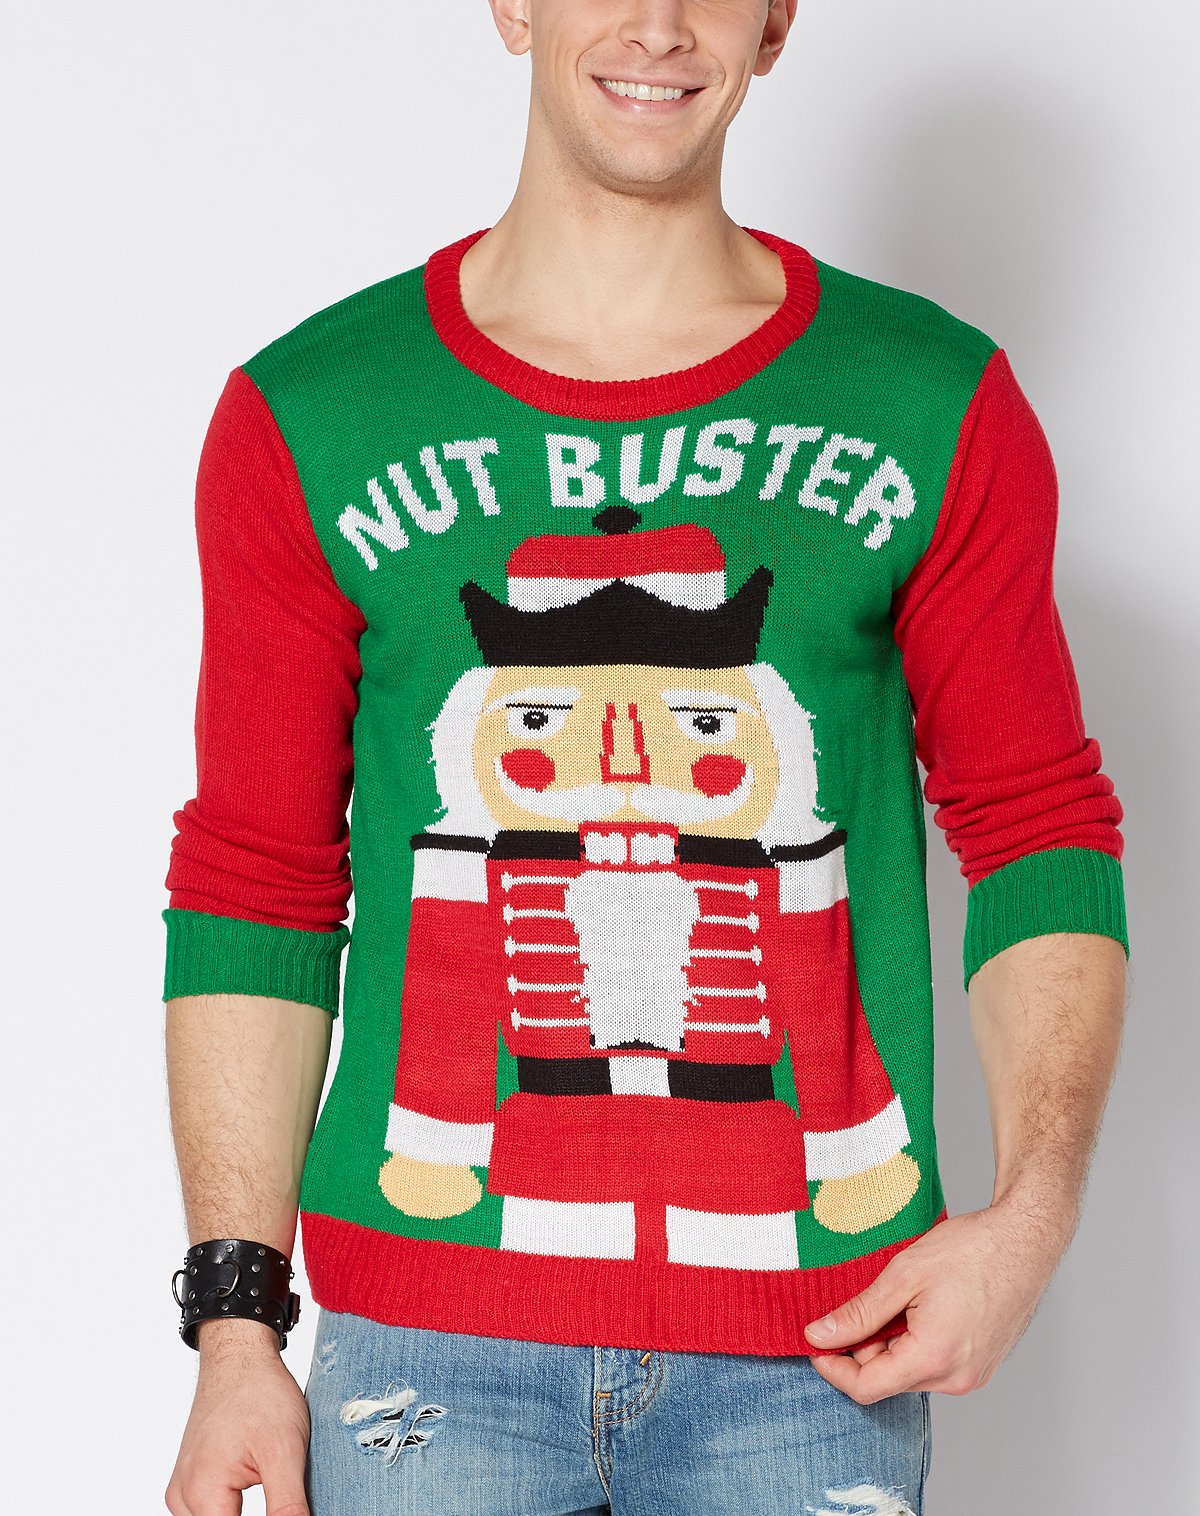 Top 10 Funny Ugly Christmas Sweaters of 2018 – Spencers 